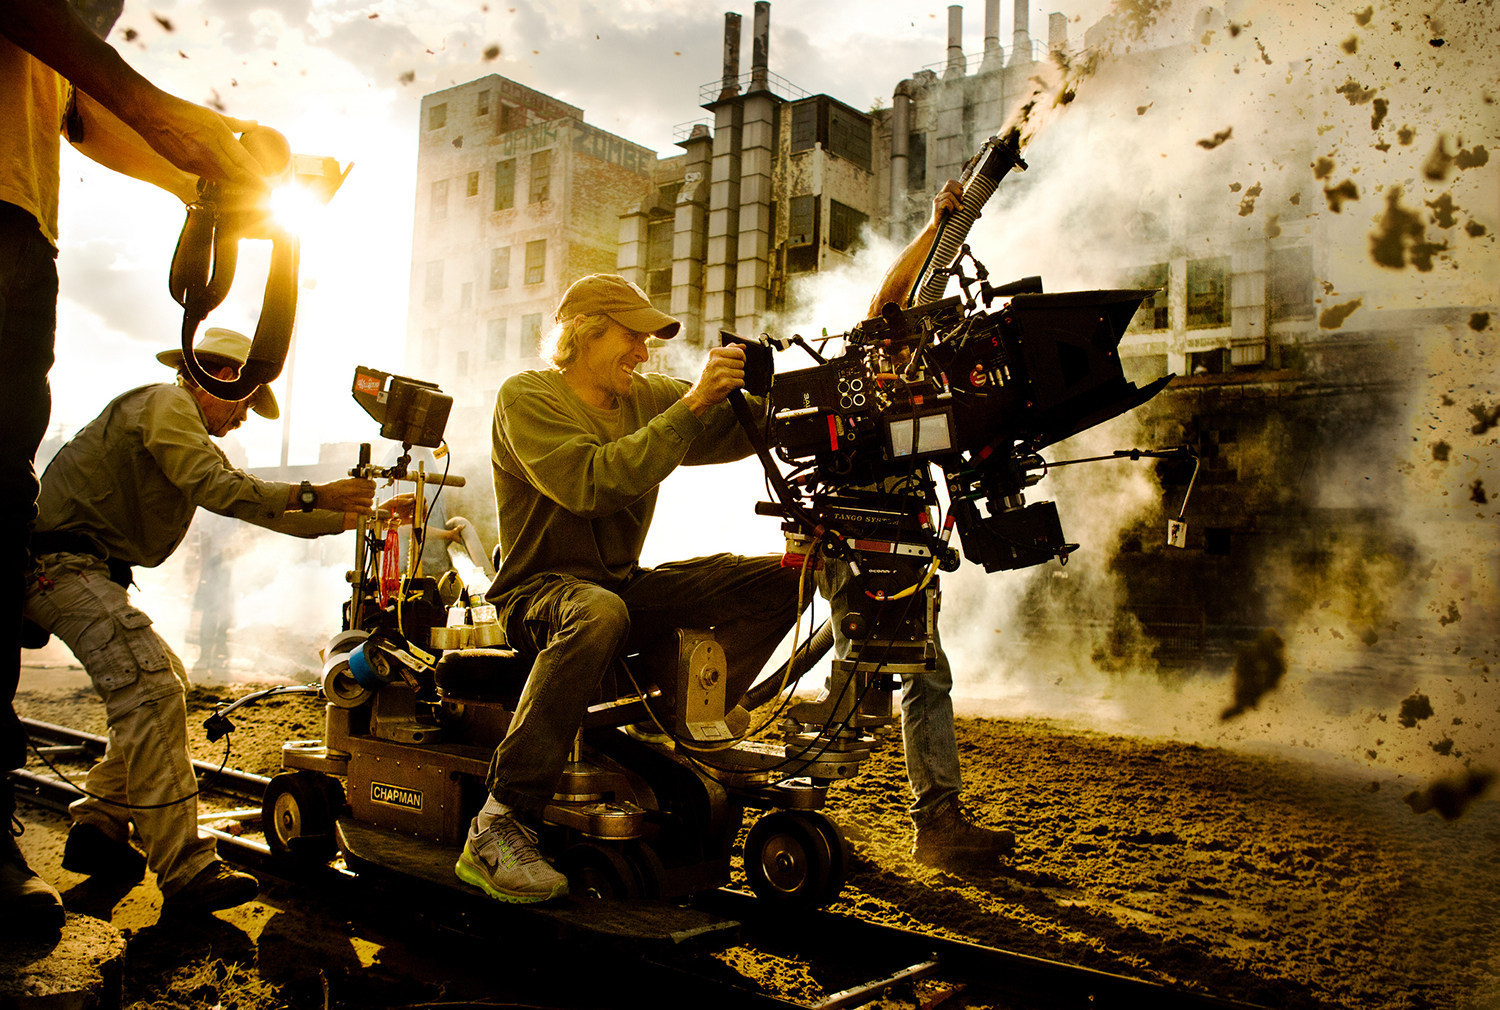 Transformers: Age of Extinction Behind the Scenes Photos & Tech Specs